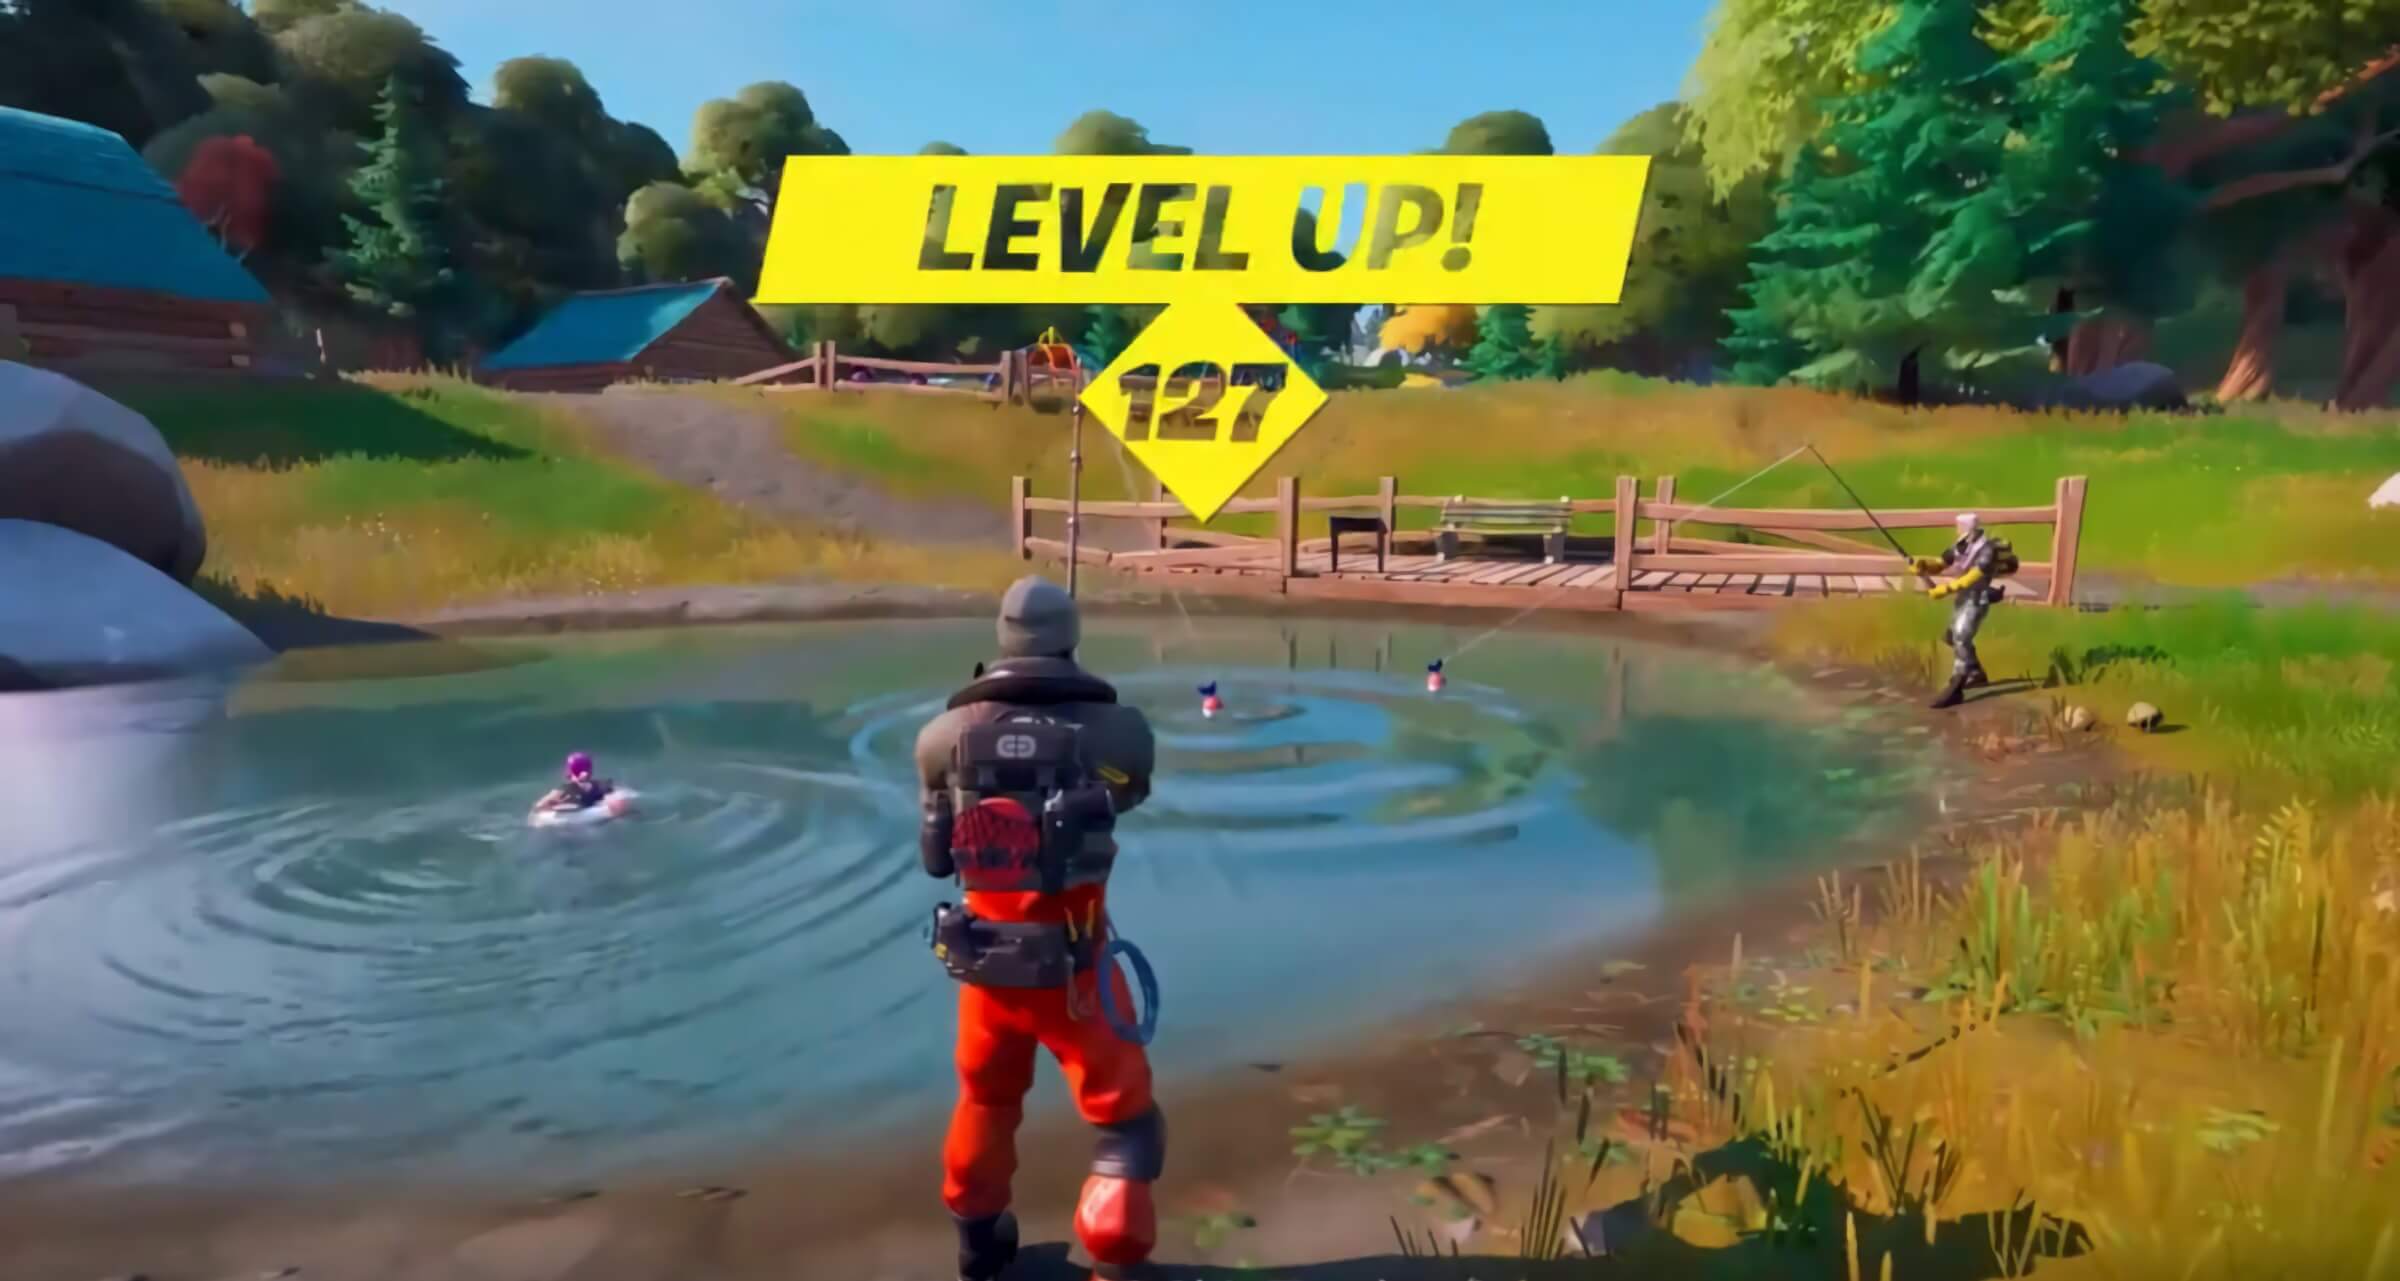 Leaked Fortnite Chapter 2 trailer shows new island and features